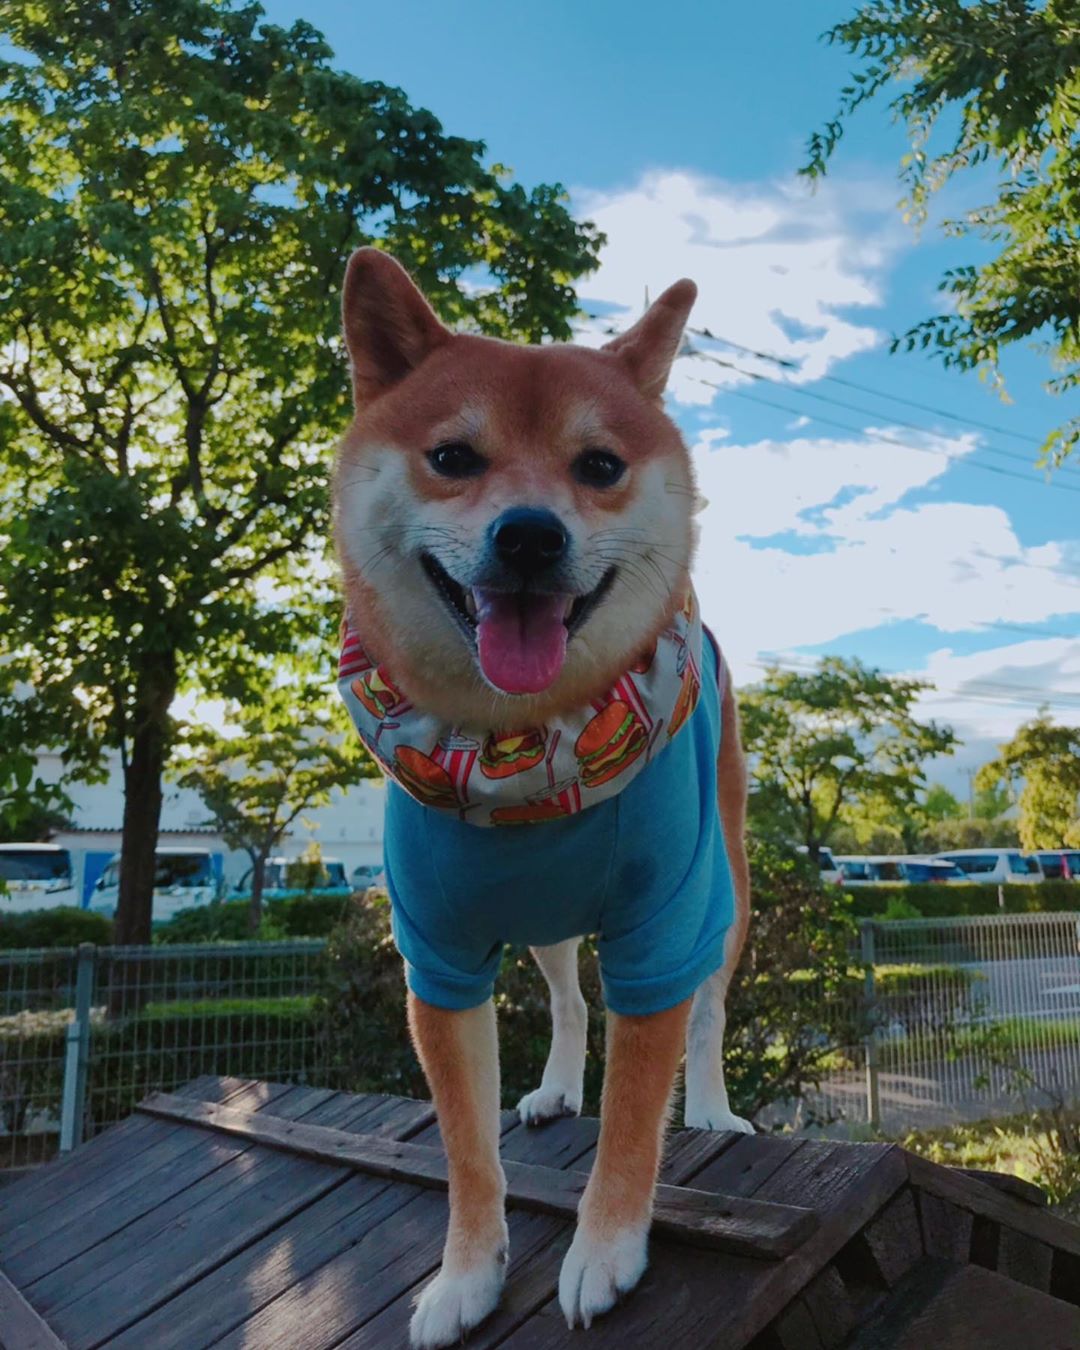 A Shiba Inu wearing a blue shirt while standing on top of its dog house in the front yard